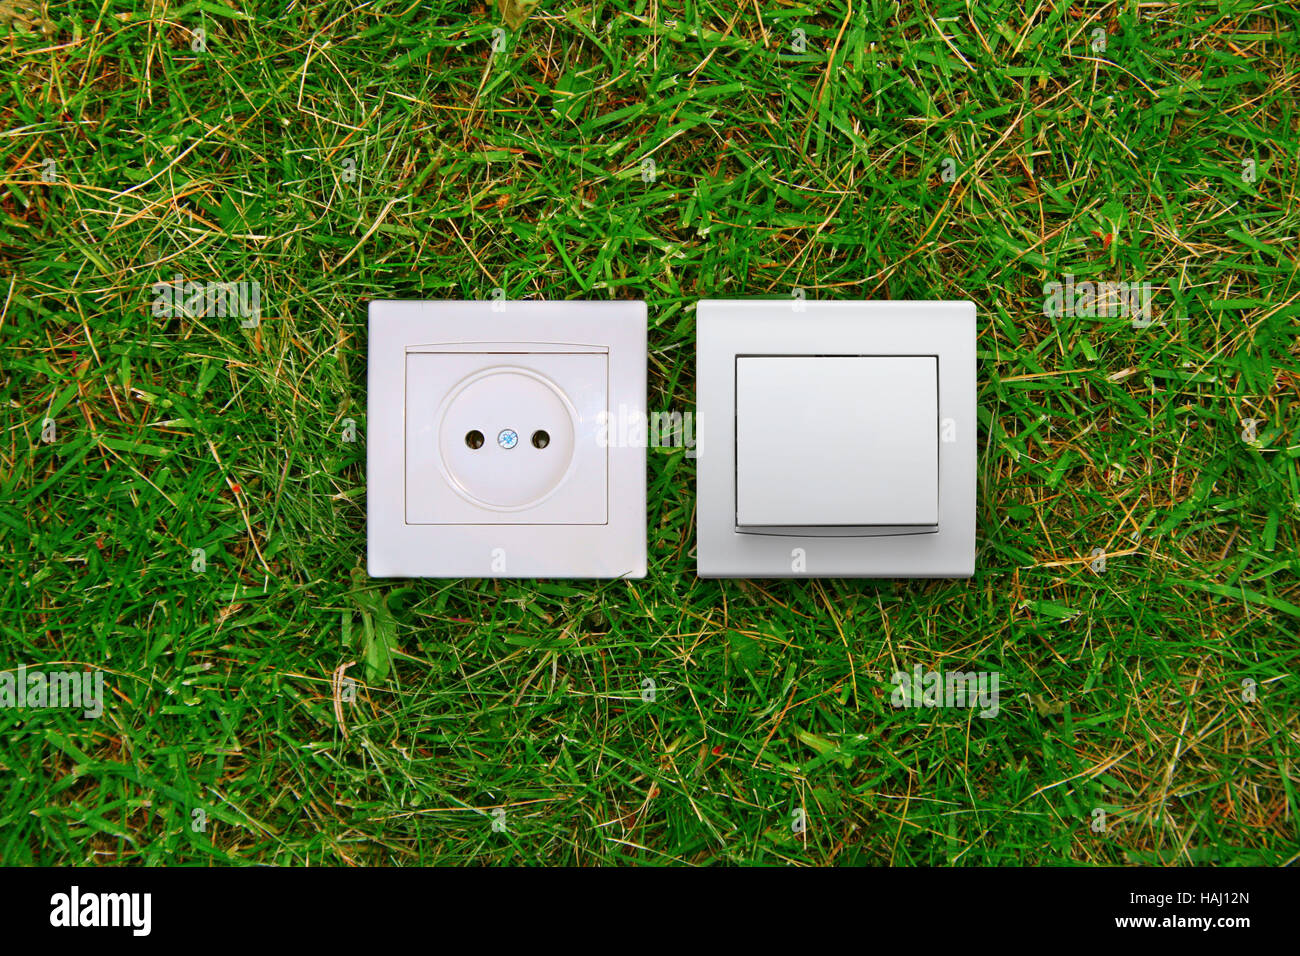 green energy concept: electric outlet and light switch on a grass Stock Photo